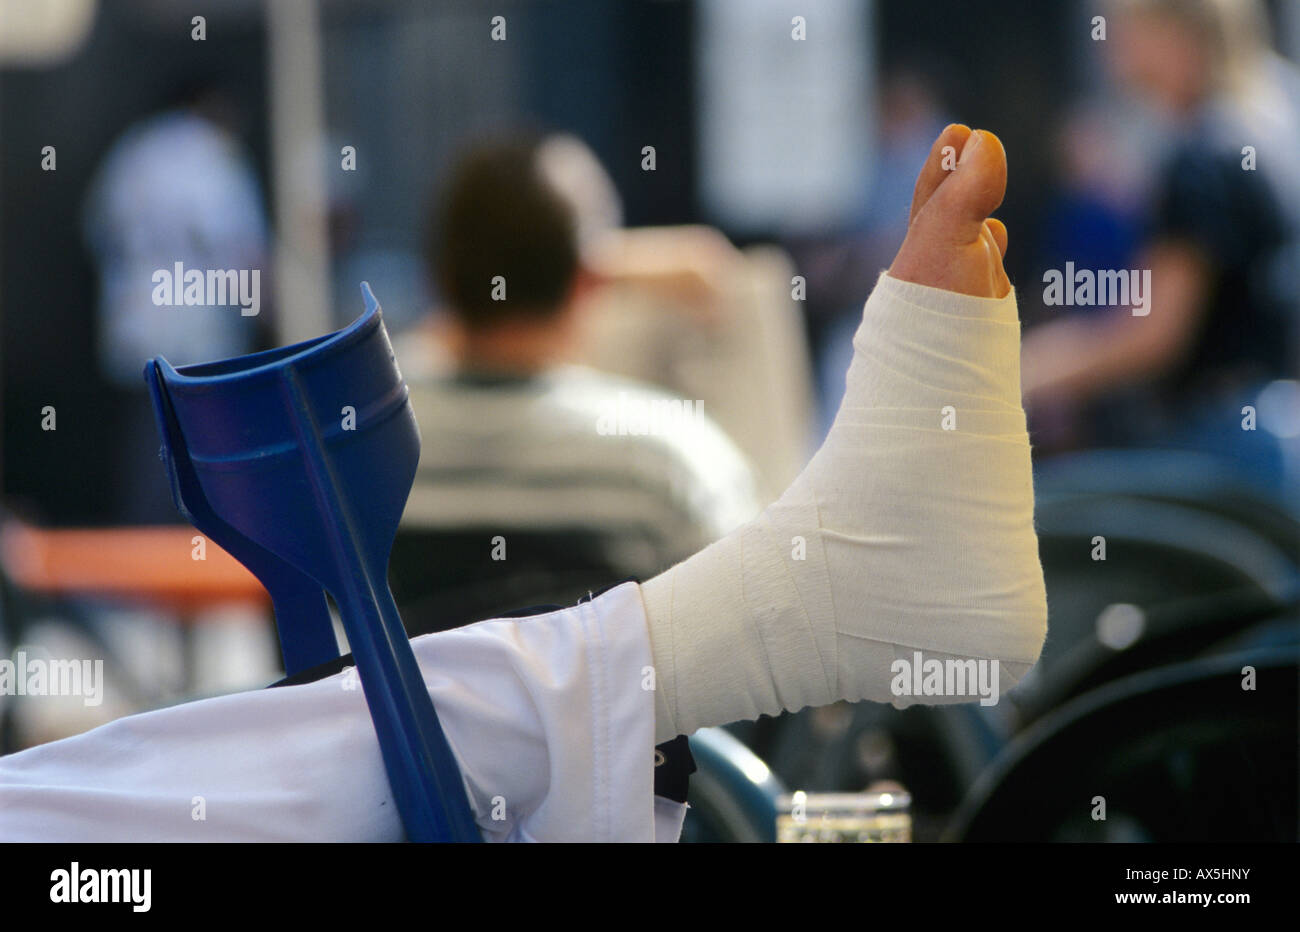 Bandaged foot put up on crutches in a cafe Stock Photo